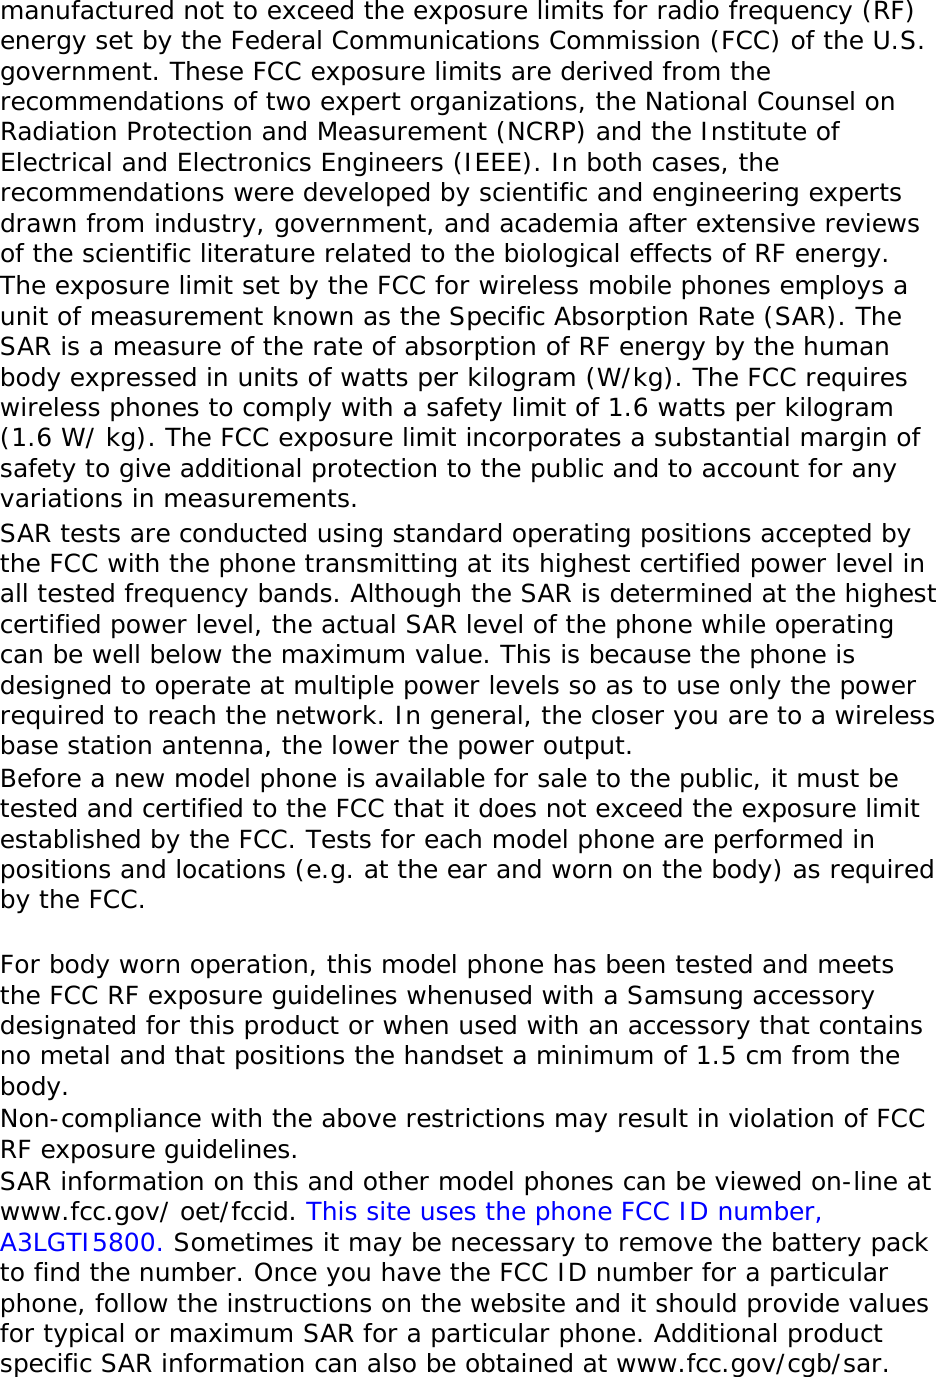 manufactured not to exceed the exposure limits for radio frequency (RF) energy set by the Federal Communications Commission (FCC) of the U.S. government. These FCC exposure limits are derived from the recommendations of two expert organizations, the National Counsel on Radiation Protection and Measurement (NCRP) and the Institute of Electrical and Electronics Engineers (IEEE). In both cases, the recommendations were developed by scientific and engineering experts drawn from industry, government, and academia after extensive reviews of the scientific literature related to the biological effects of RF energy. The exposure limit set by the FCC for wireless mobile phones employs a unit of measurement known as the Specific Absorption Rate (SAR). The SAR is a measure of the rate of absorption of RF energy by the human body expressed in units of watts per kilogram (W/kg). The FCC requires wireless phones to comply with a safety limit of 1.6 watts per kilogram (1.6 W/ kg). The FCC exposure limit incorporates a substantial margin of safety to give additional protection to the public and to account for any variations in measurements. SAR tests are conducted using standard operating positions accepted by the FCC with the phone transmitting at its highest certified power level in all tested frequency bands. Although the SAR is determined at the highest certified power level, the actual SAR level of the phone while operating can be well below the maximum value. This is because the phone is designed to operate at multiple power levels so as to use only the power required to reach the network. In general, the closer you are to a wireless base station antenna, the lower the power output. Before a new model phone is available for sale to the public, it must be tested and certified to the FCC that it does not exceed the exposure limit established by the FCC. Tests for each model phone are performed in positions and locations (e.g. at the ear and worn on the body) as required by the FCC.    For body worn operation, this model phone has been tested and meets the FCC RF exposure guidelines whenused with a Samsung accessory designated for this product or when used with an accessory that contains no metal and that positions the handset a minimum of 1.5 cm from the body.  Non-compliance with the above restrictions may result in violation of FCC RF exposure guidelines. SAR information on this and other model phones can be viewed on-line at www.fcc.gov/ oet/fccid. This site uses the phone FCC ID number, A3LGTI5800. Sometimes it may be necessary to remove the battery pack to find the number. Once you have the FCC ID number for a particular phone, follow the instructions on the website and it should provide values for typical or maximum SAR for a particular phone. Additional product specific SAR information can also be obtained at www.fcc.gov/cgb/sar. 